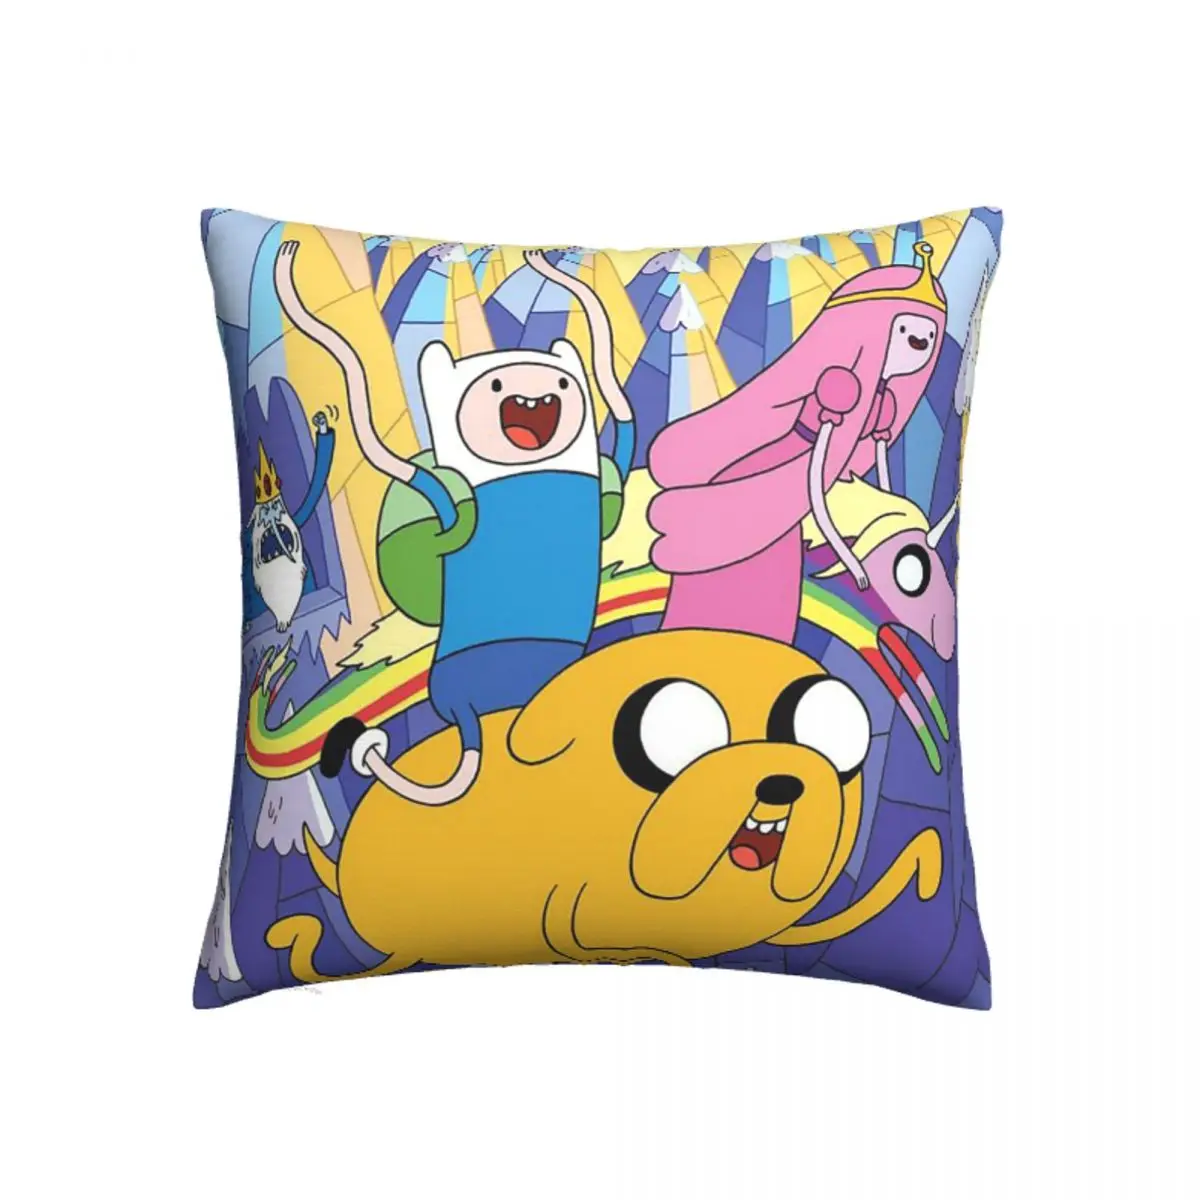 

Adventure Time Kids Pillowcase Polyester Cushion Cover Decorative cartoon anime Pillow Case Cover Bedroom Drop Shipping 40*40cm